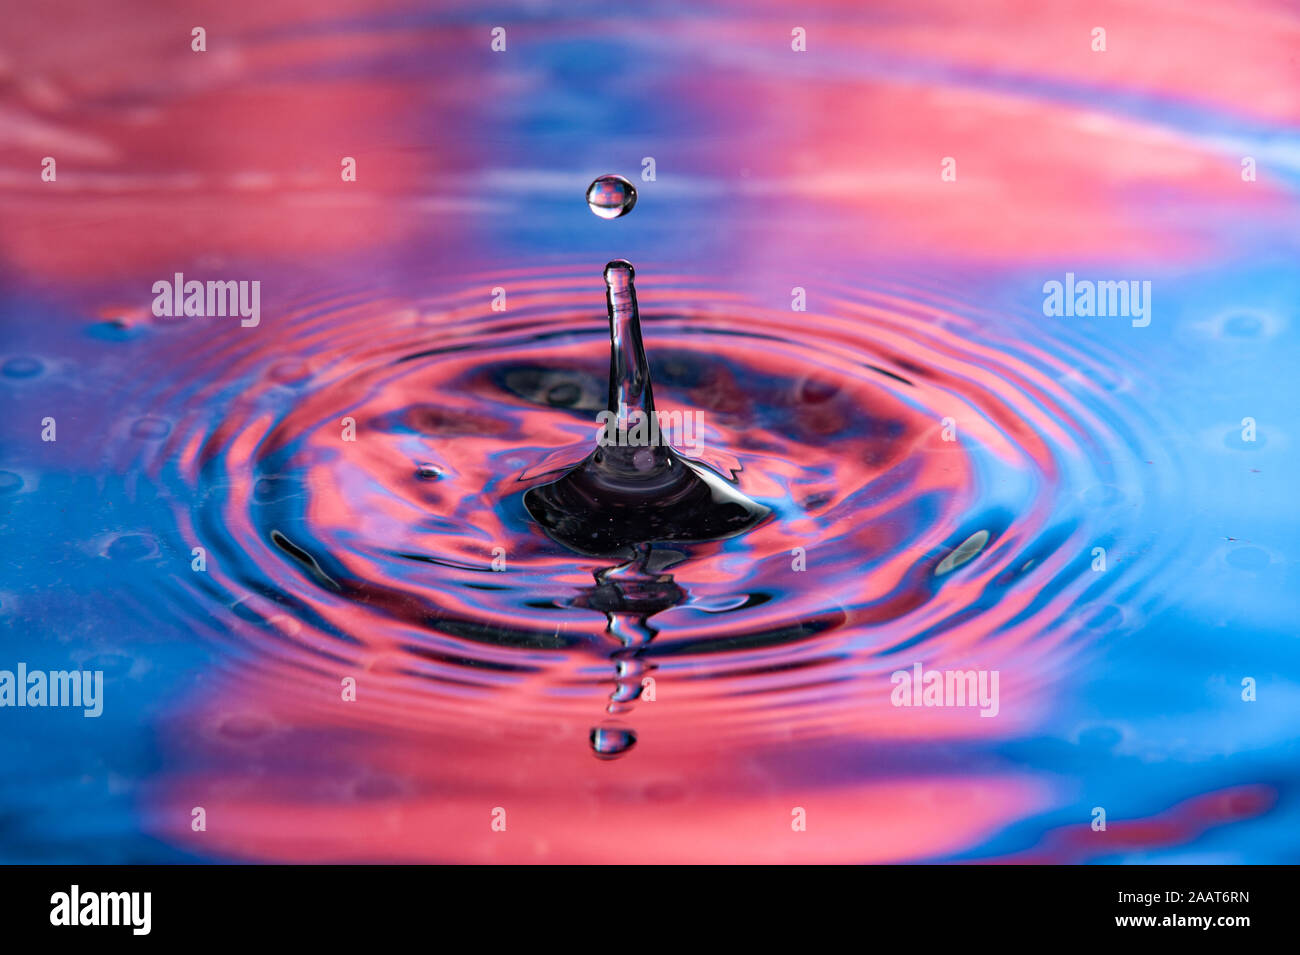 Single water drop at top of splash. Vibrant red and blue colors, high speed water drop photography Stock Photo